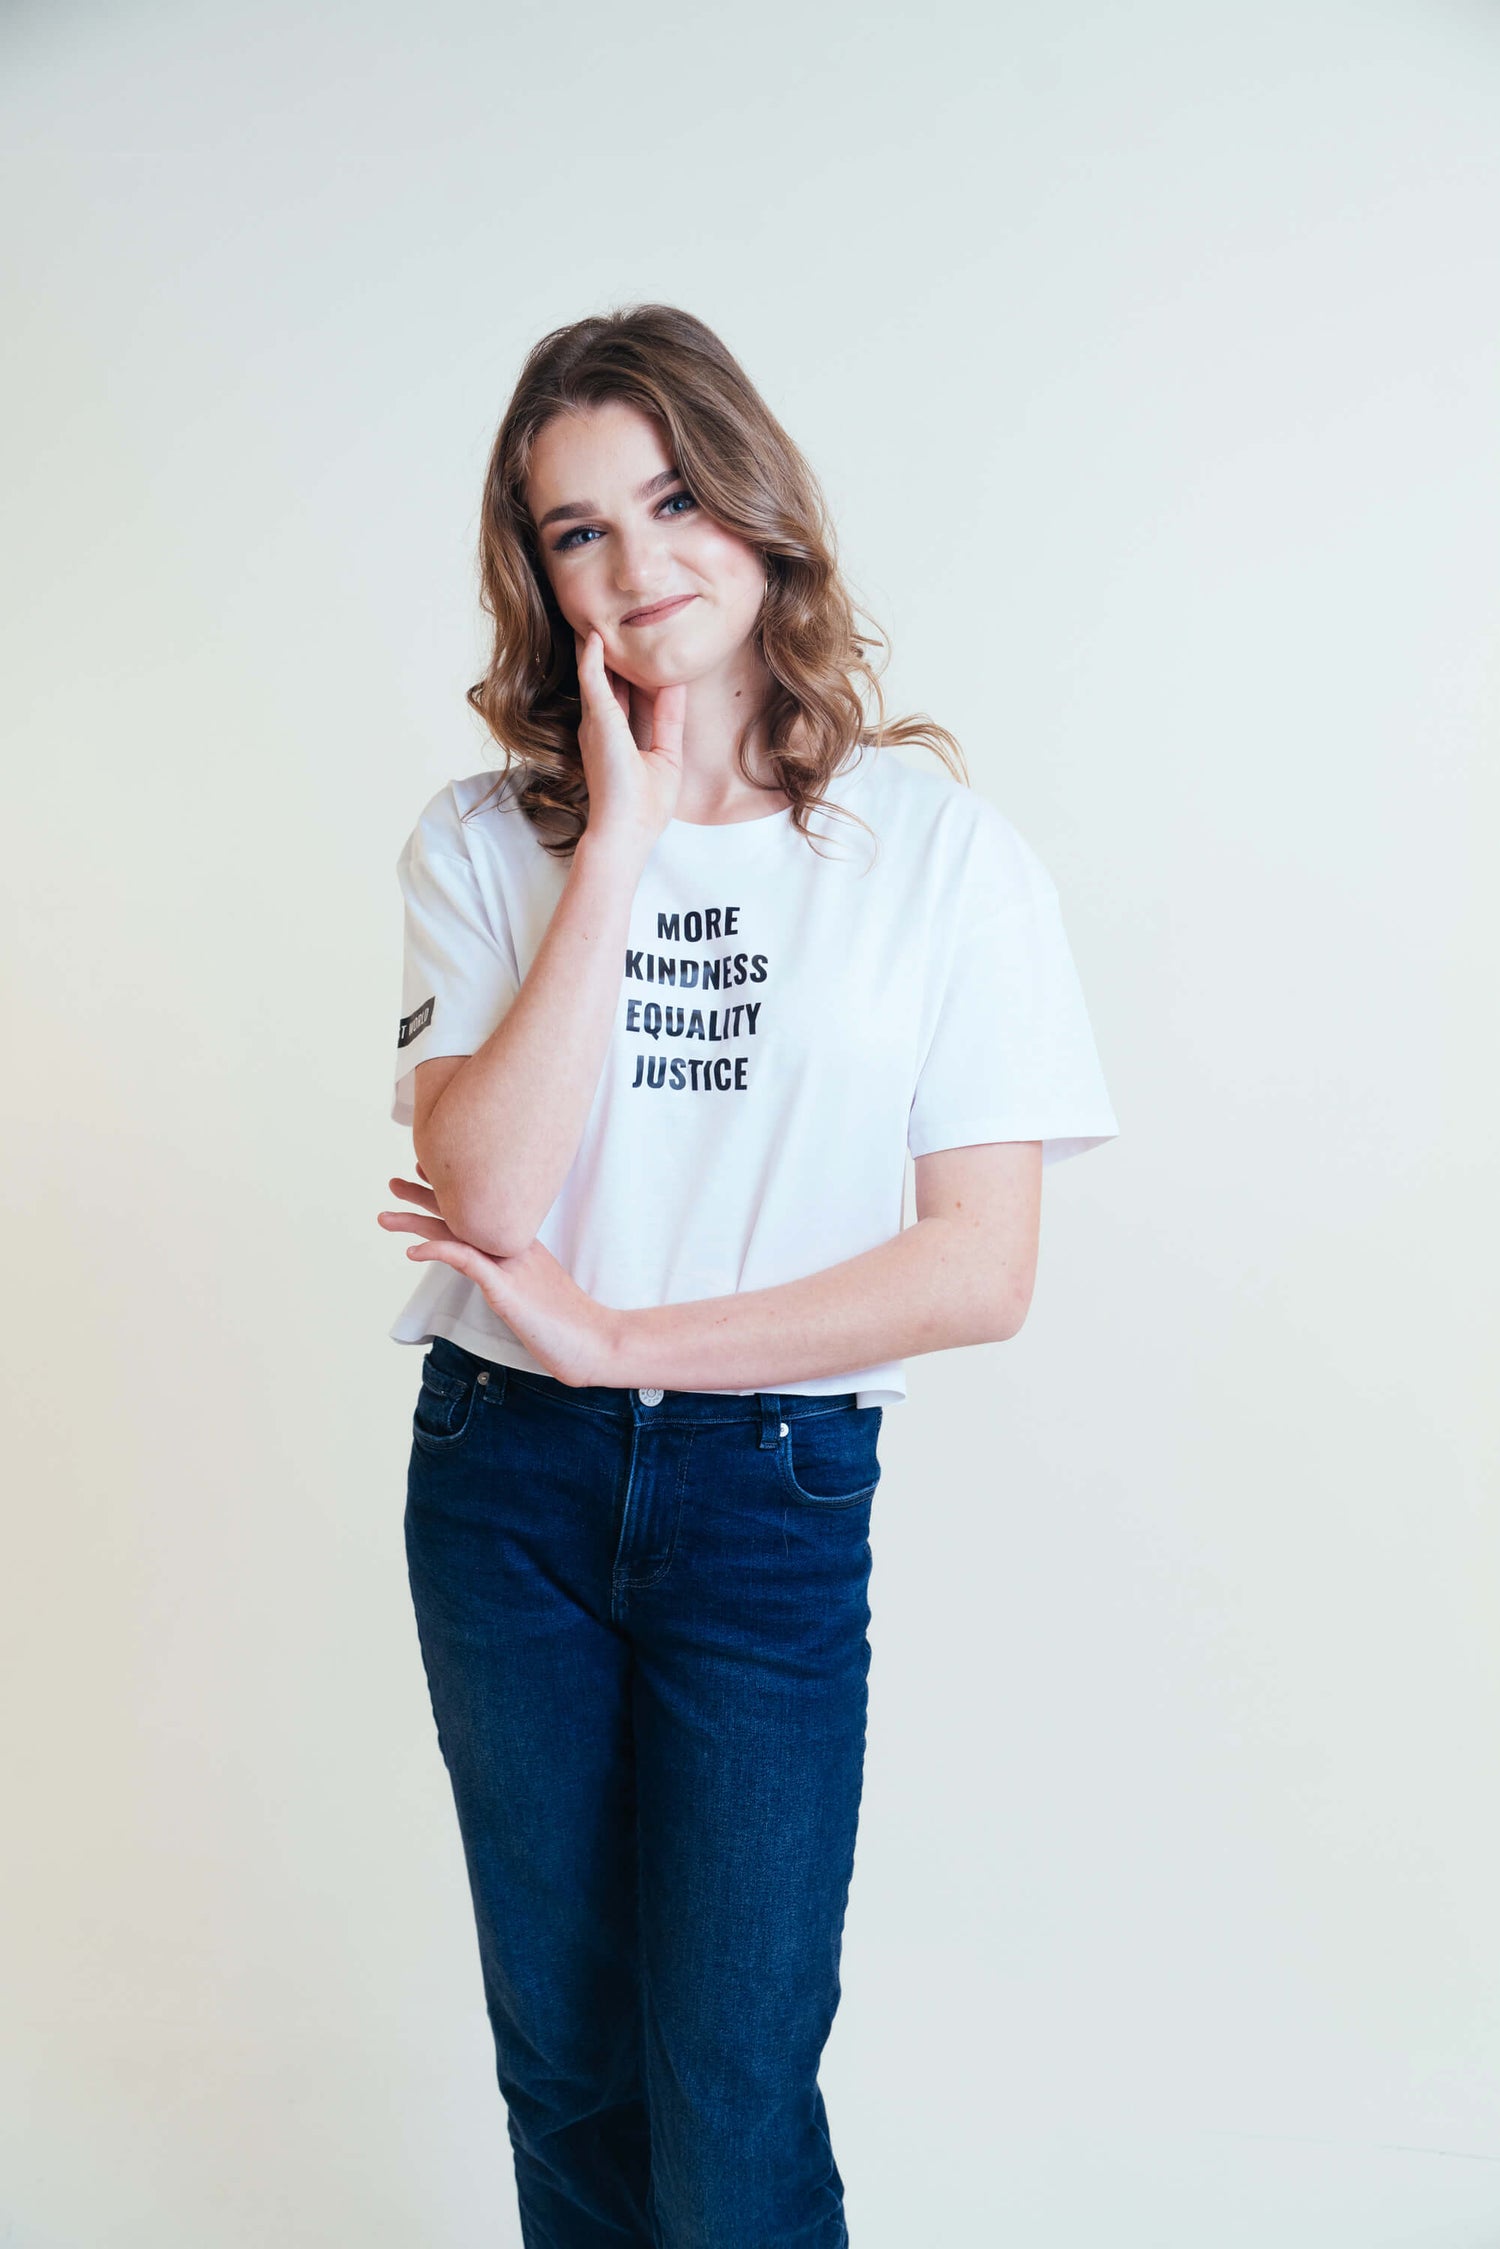 Angie smiling at the camera wearing a white crop top with the words 'More Kindness Equality Justice' written in black.